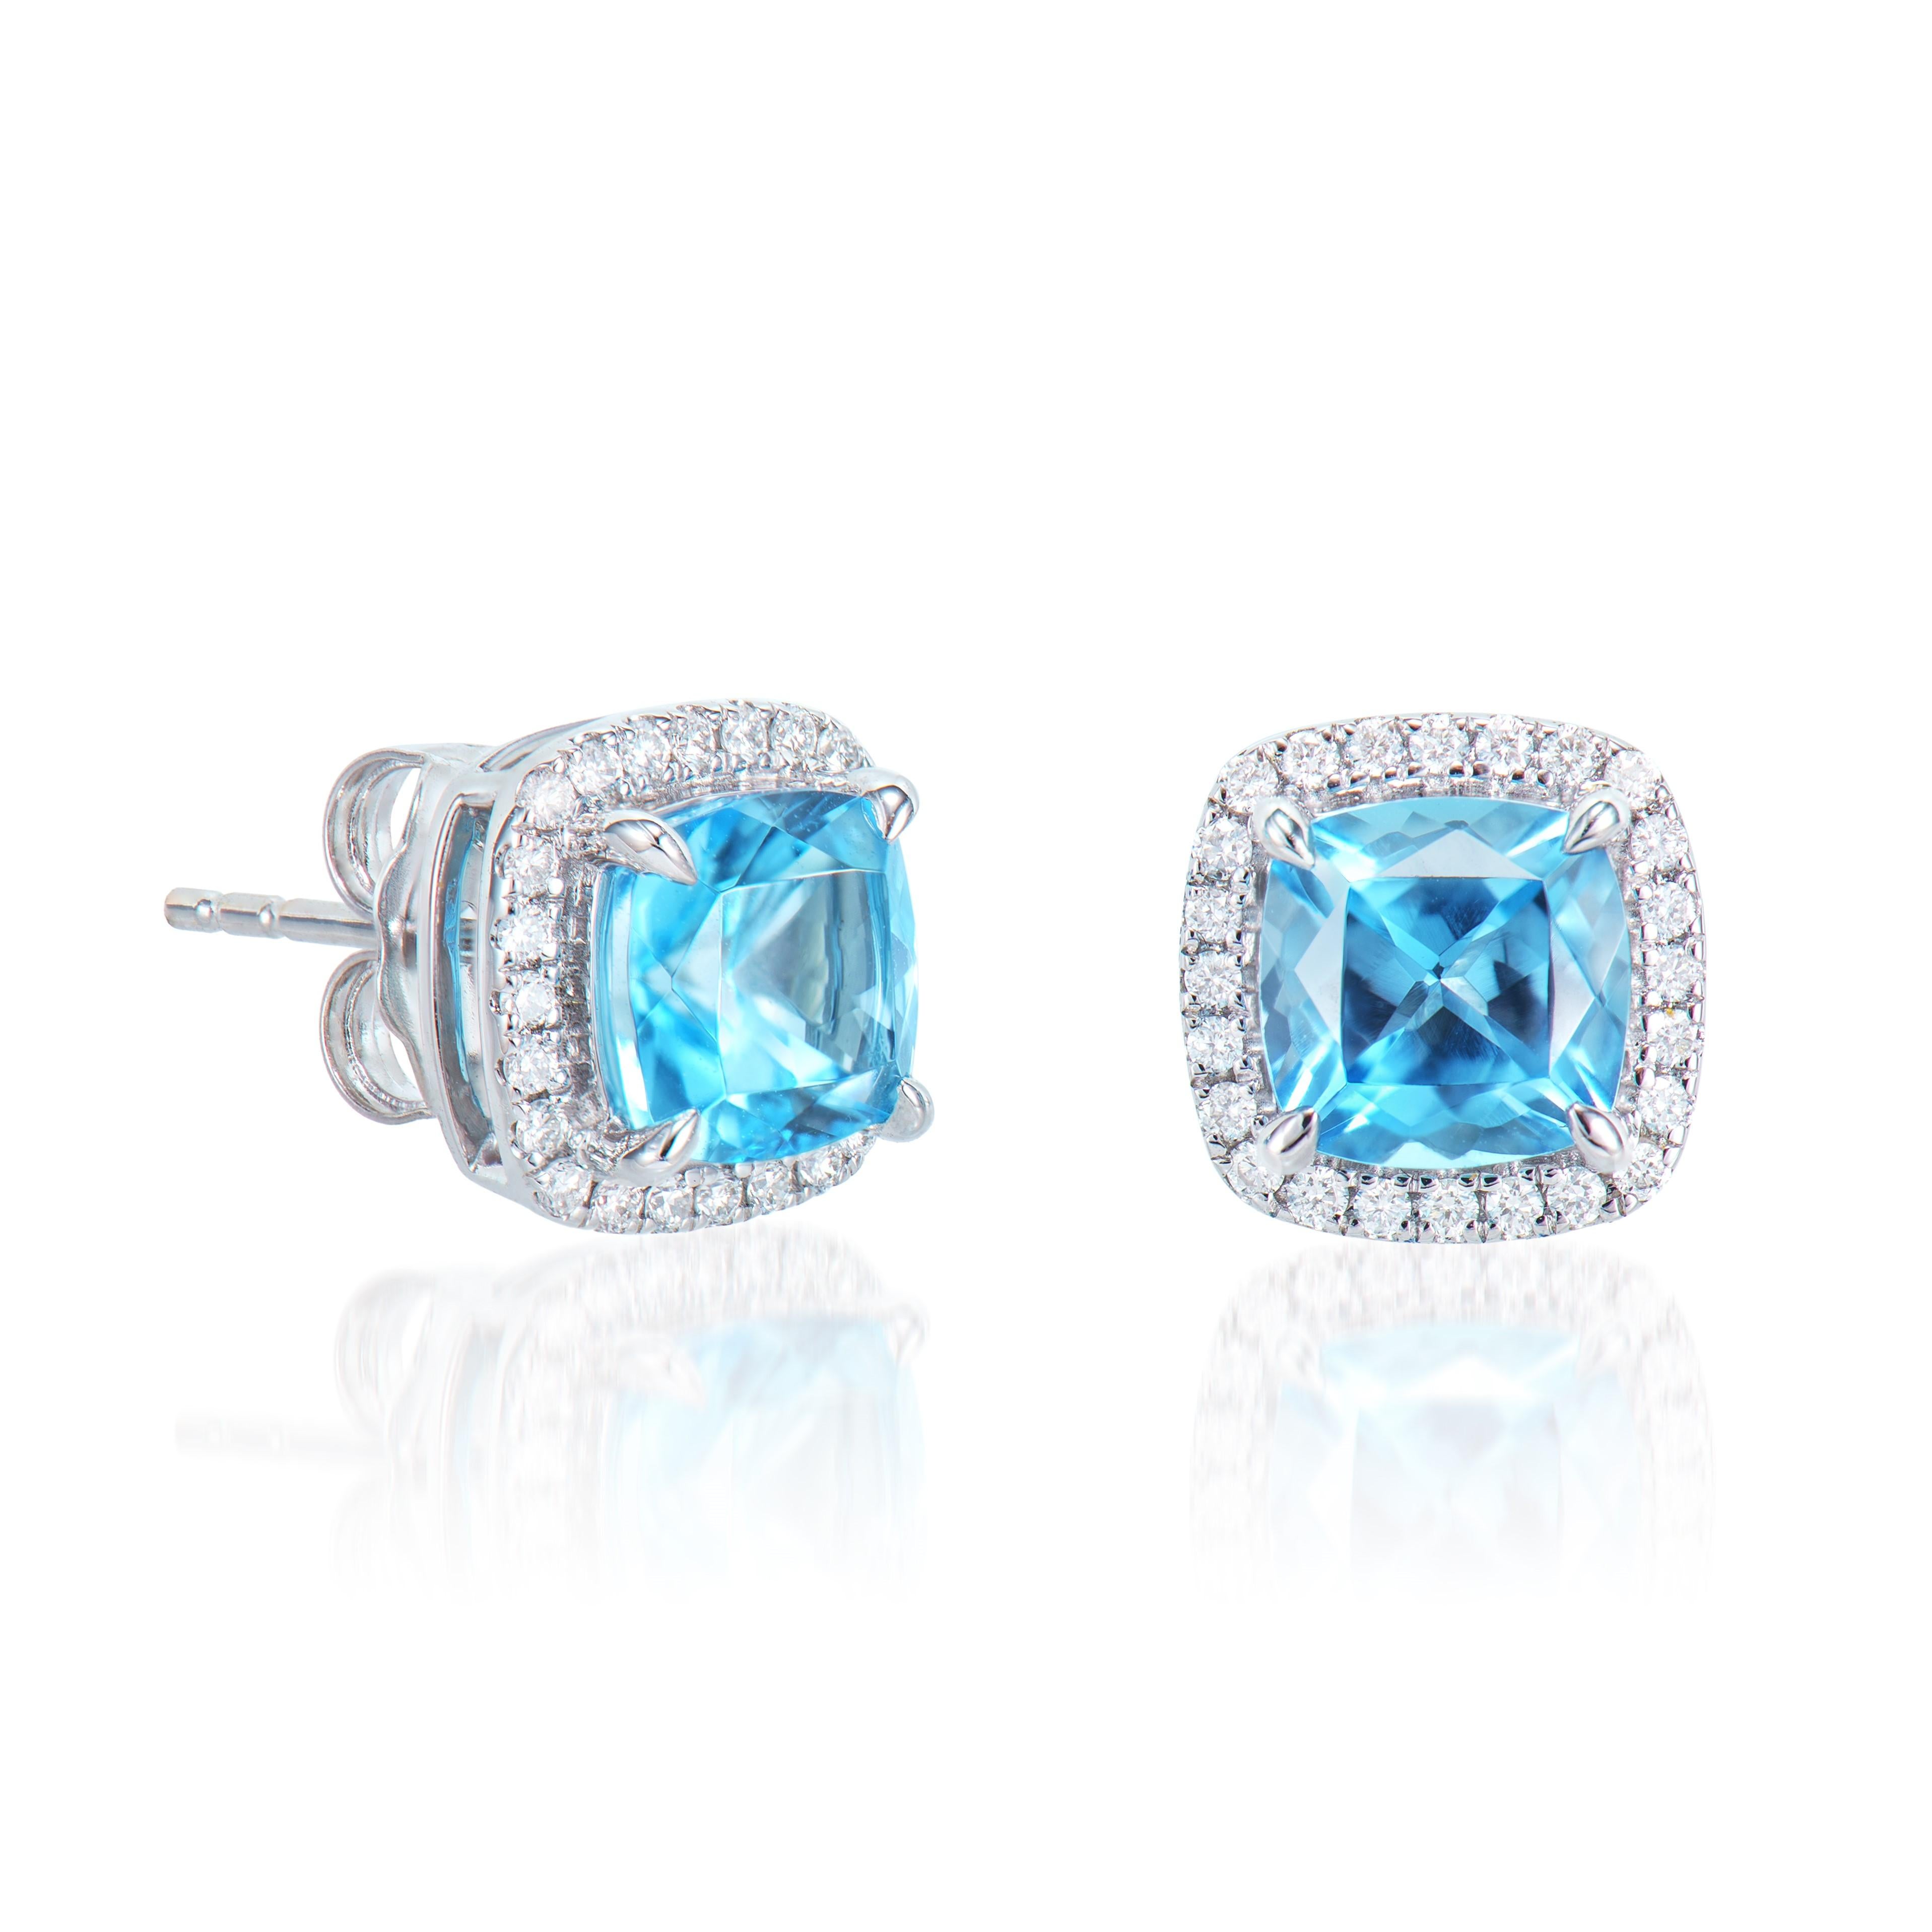 Presented A lovely collection of gems, including Amethyst, Peridot, Rhodolite, Sky Blue Topaz, Swiss Blue Topaz and Morganite is perfect for people who value quality and want to wear it to any occasion or celebration. The white gold Swiss Blue topaz